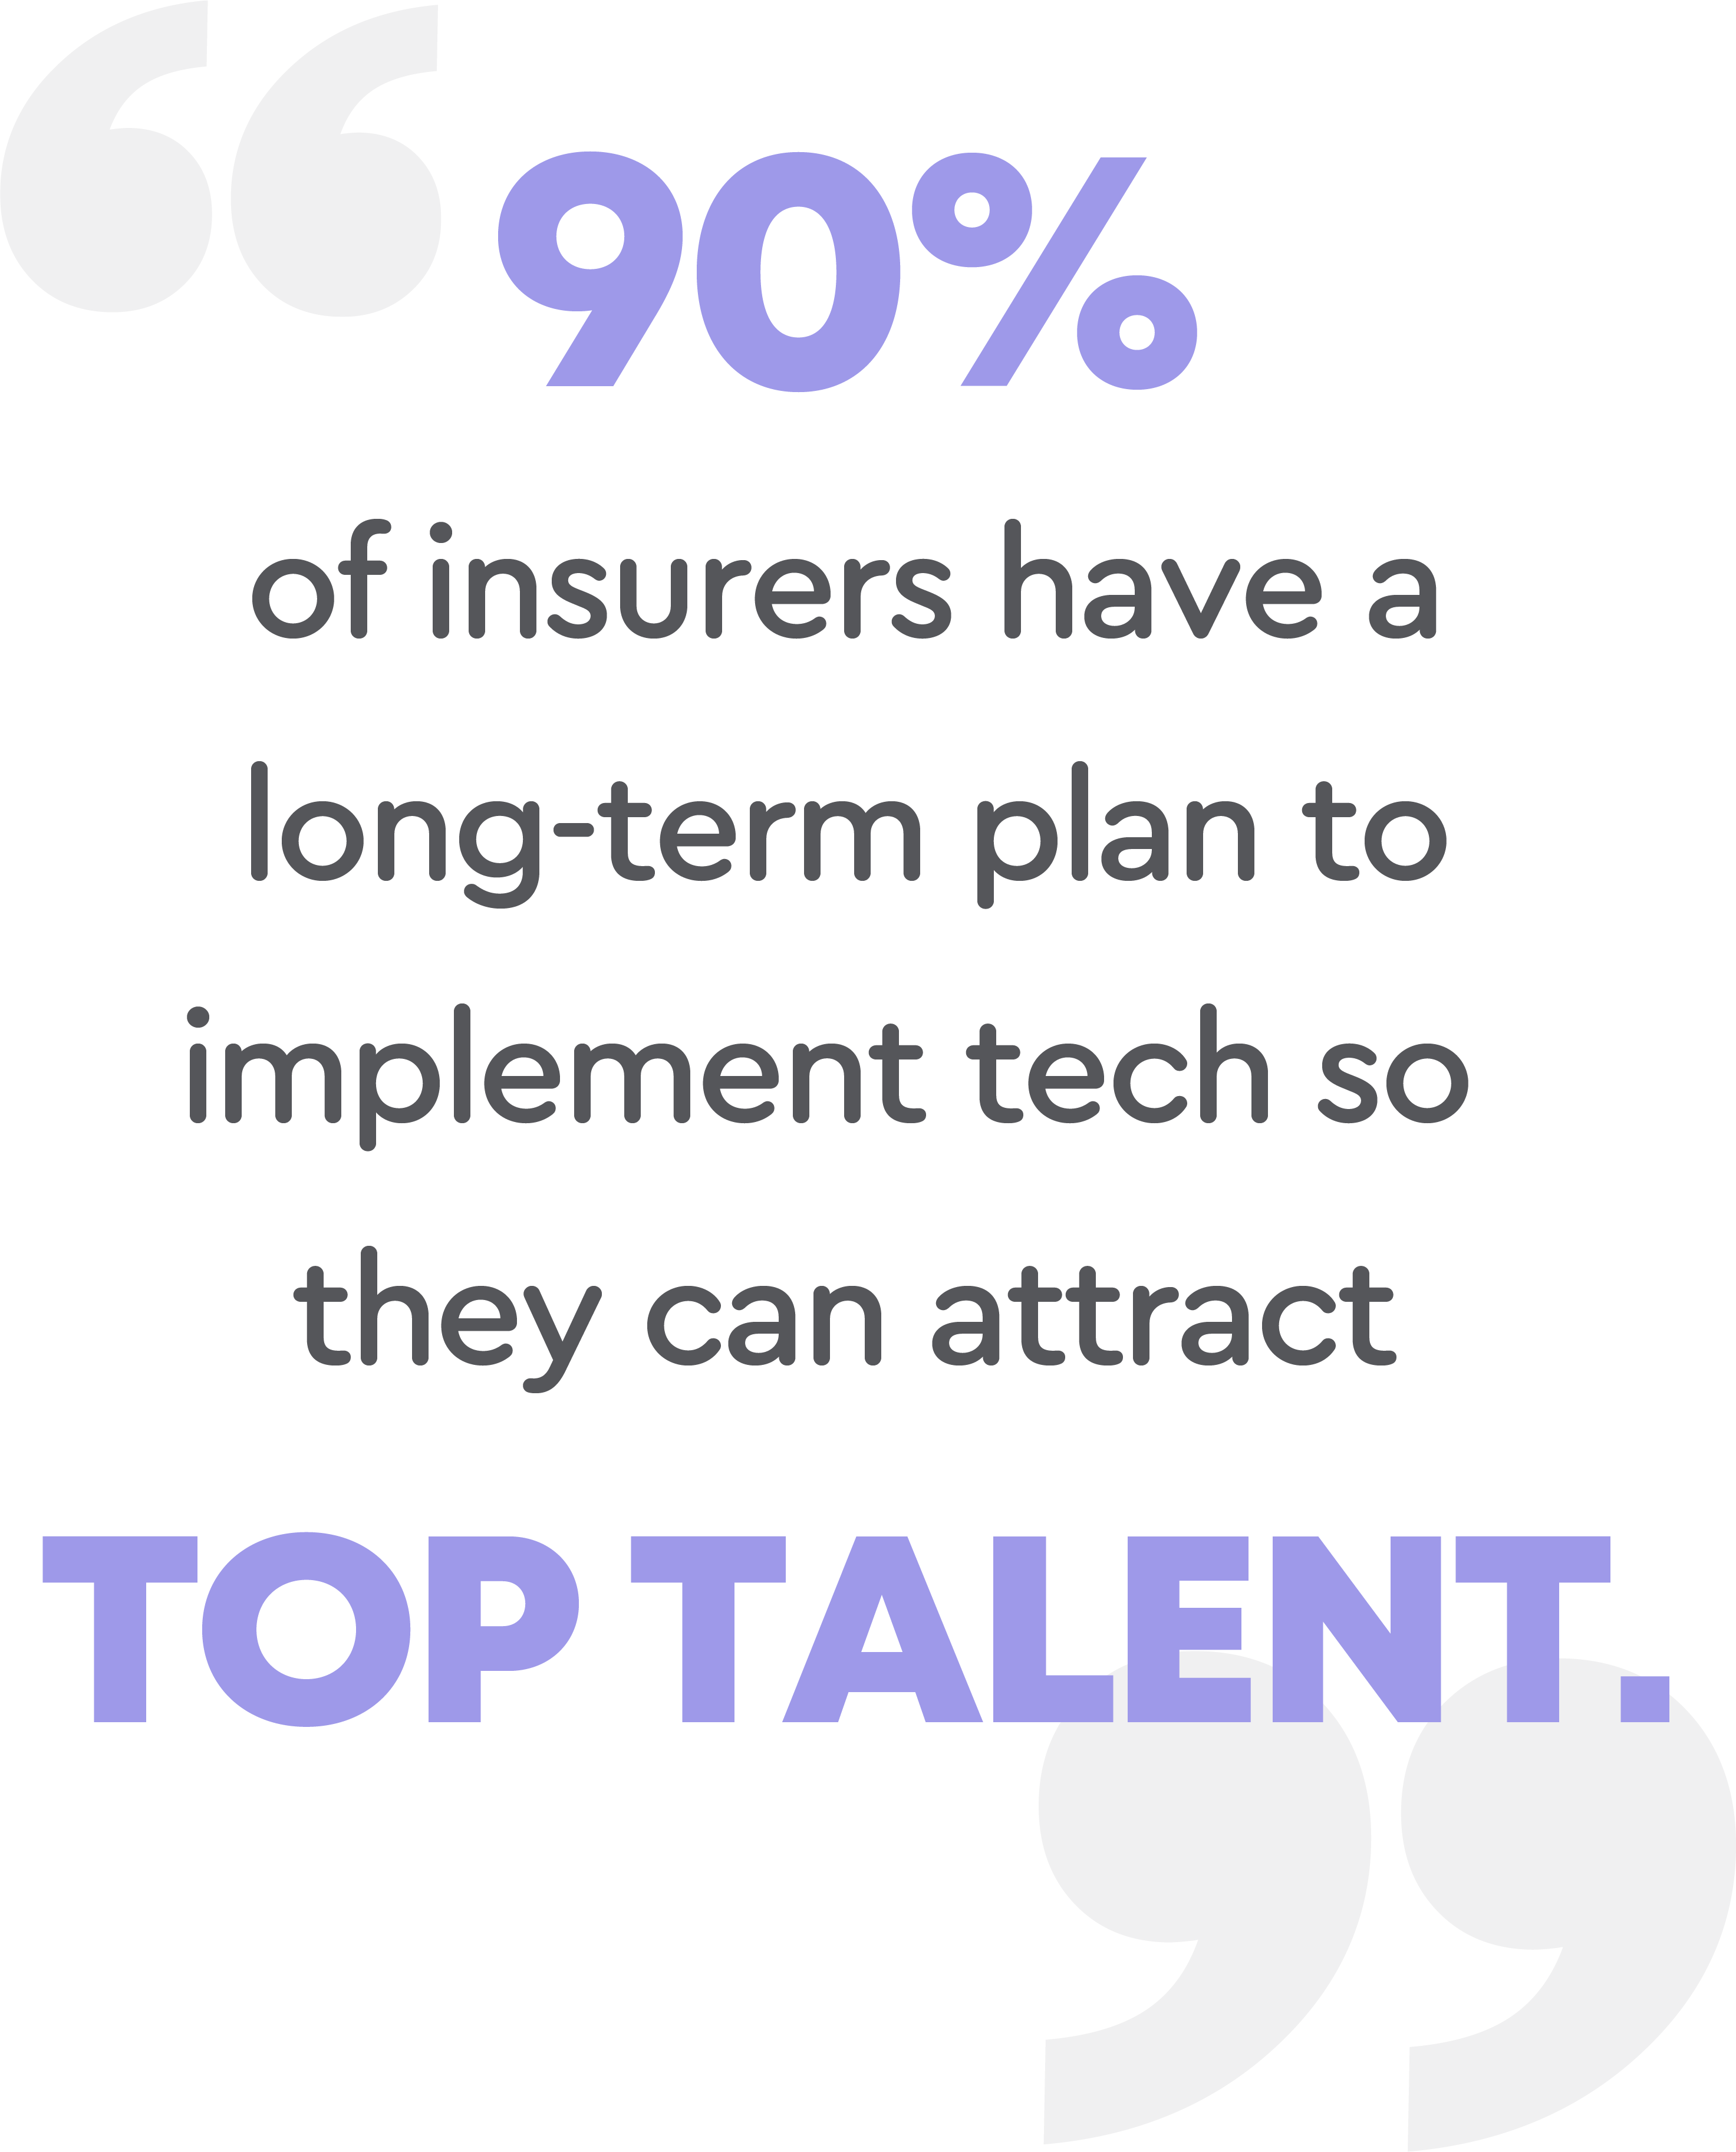 90% of insurers have a long-term plan to implement tech so they can attract top talent pull quote